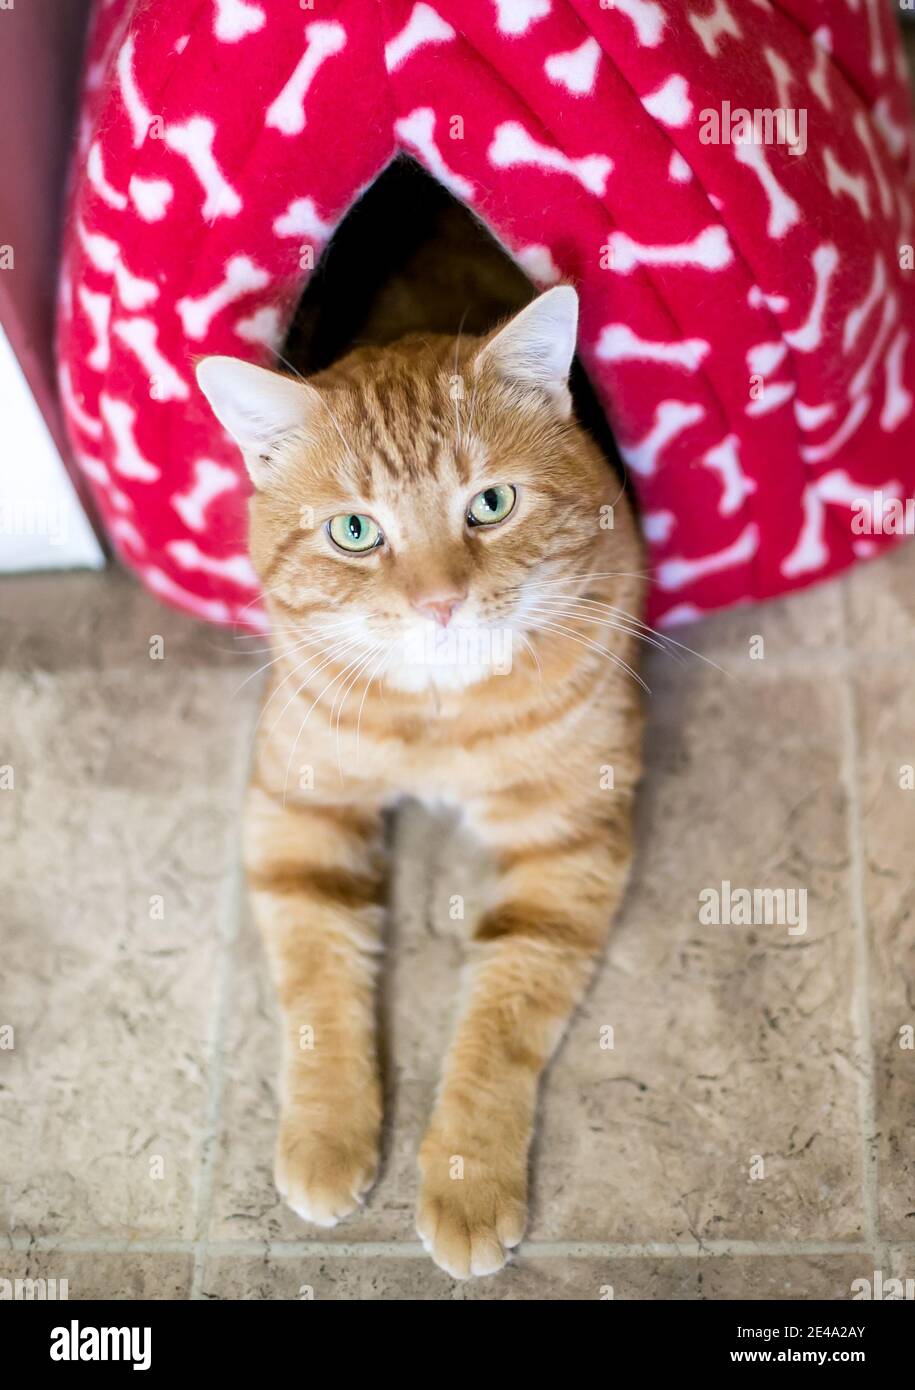 An orange tabby shorthair cat relaxing in a covered cat bed and looking up at the camera Stock Photo